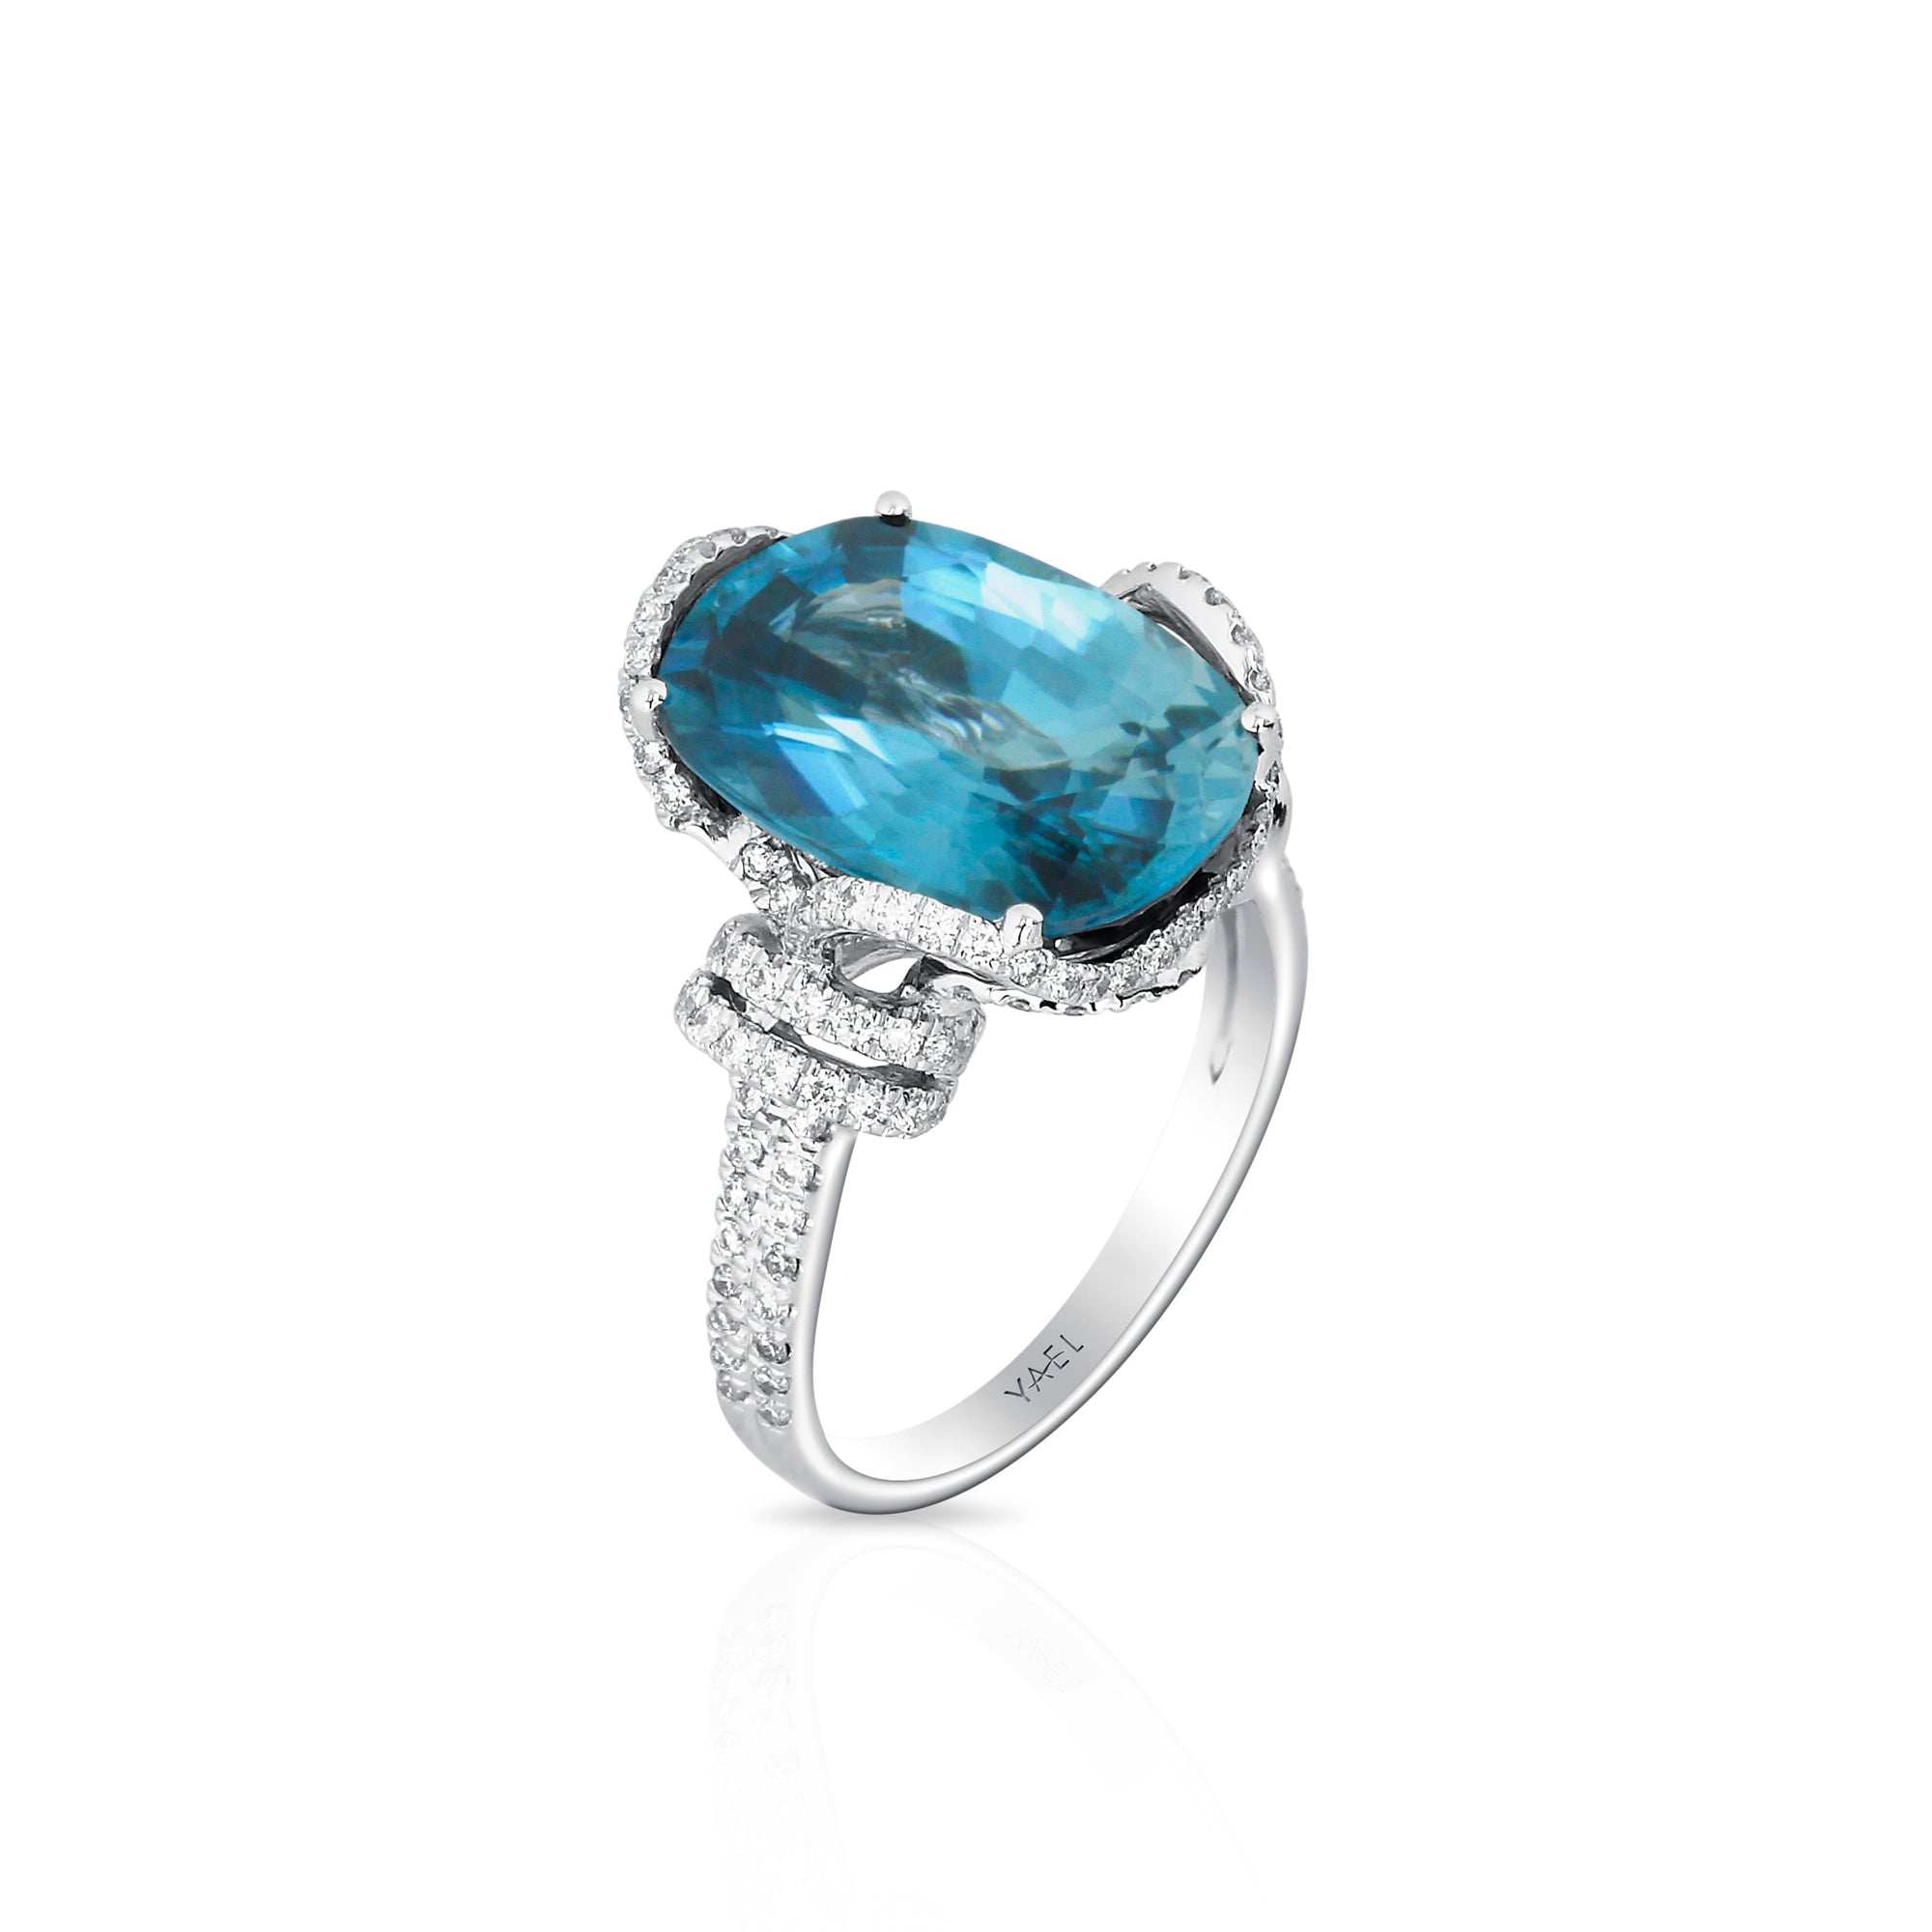 Blue Zircon & Diamond Ring by Yael available at Talisman Collection Fine Jewelers in El Dorado Hills, CA and online. This magnificent cocktail ring features an impressive 12.45 carat blue zircon surrounded by 0.85 carats of sparkling white diamonds set in 18k white gold. Both modern and classic, it's sure to be a future heirloom.